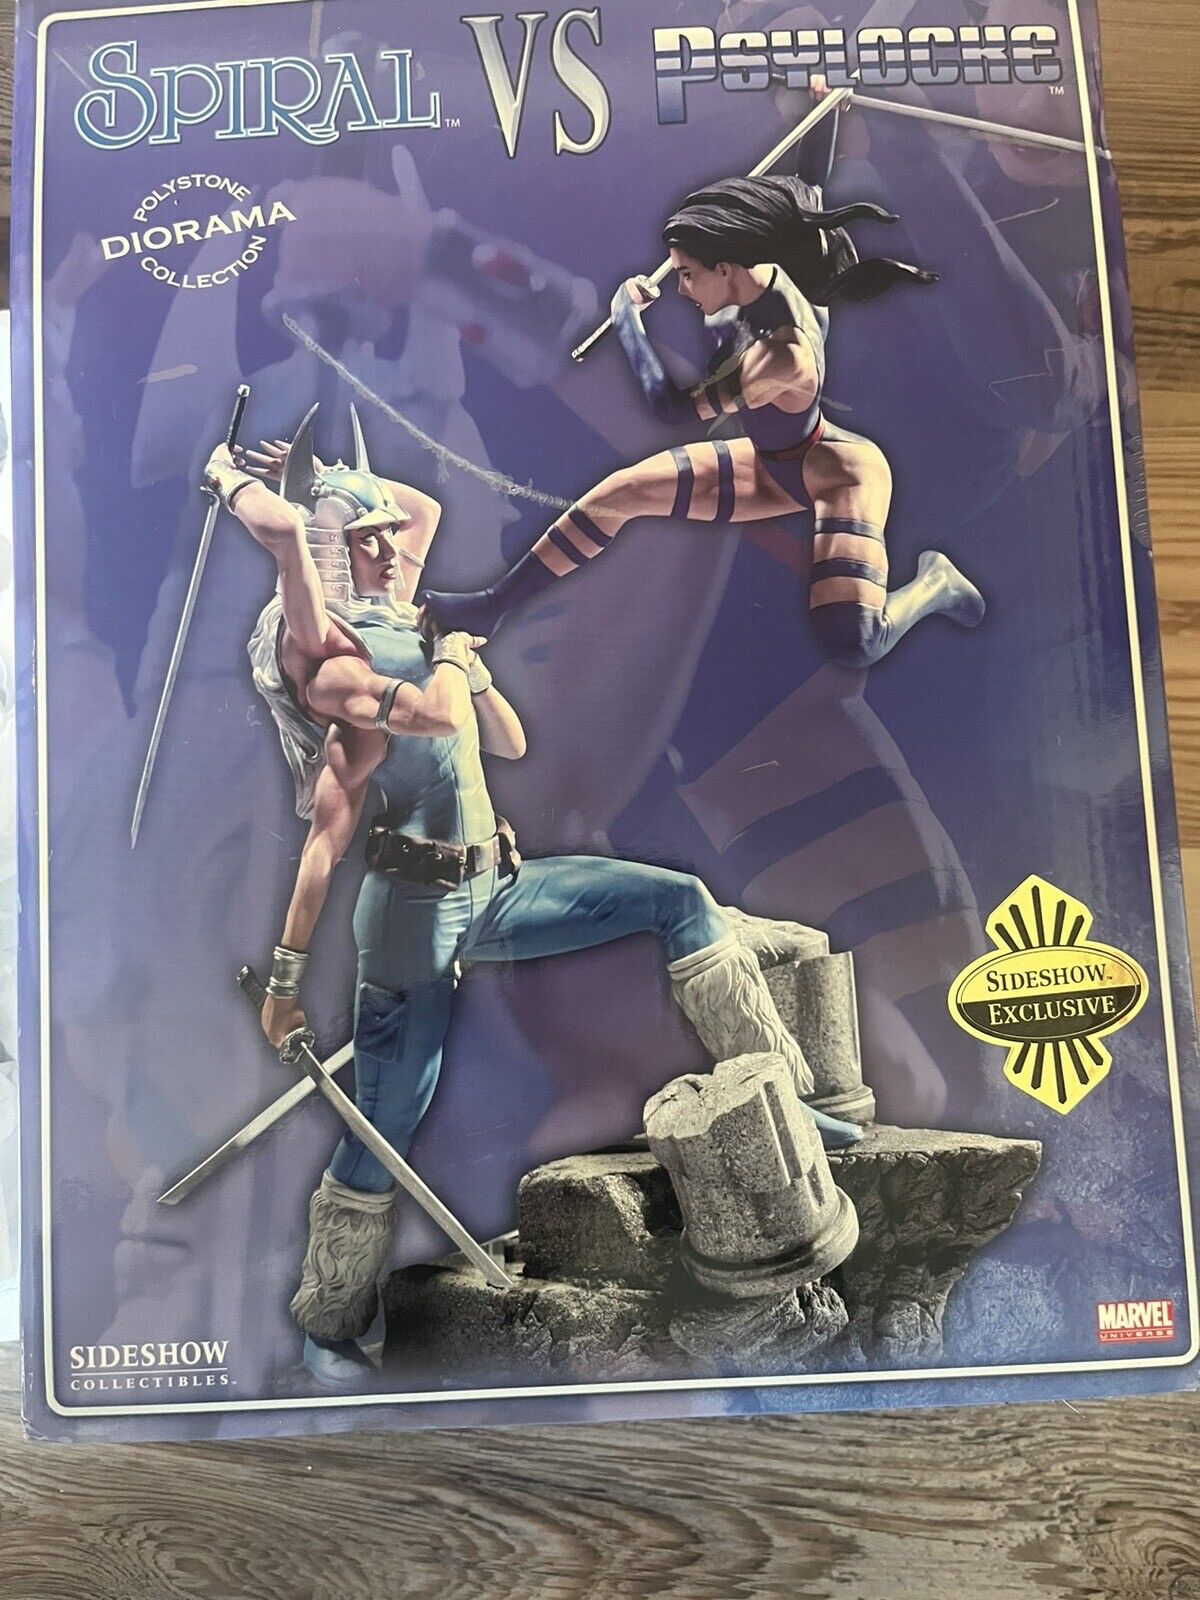 Sideshow Collectibles Spiral Vs Psylocke Exclusive Diorama Statue Marvel NEW